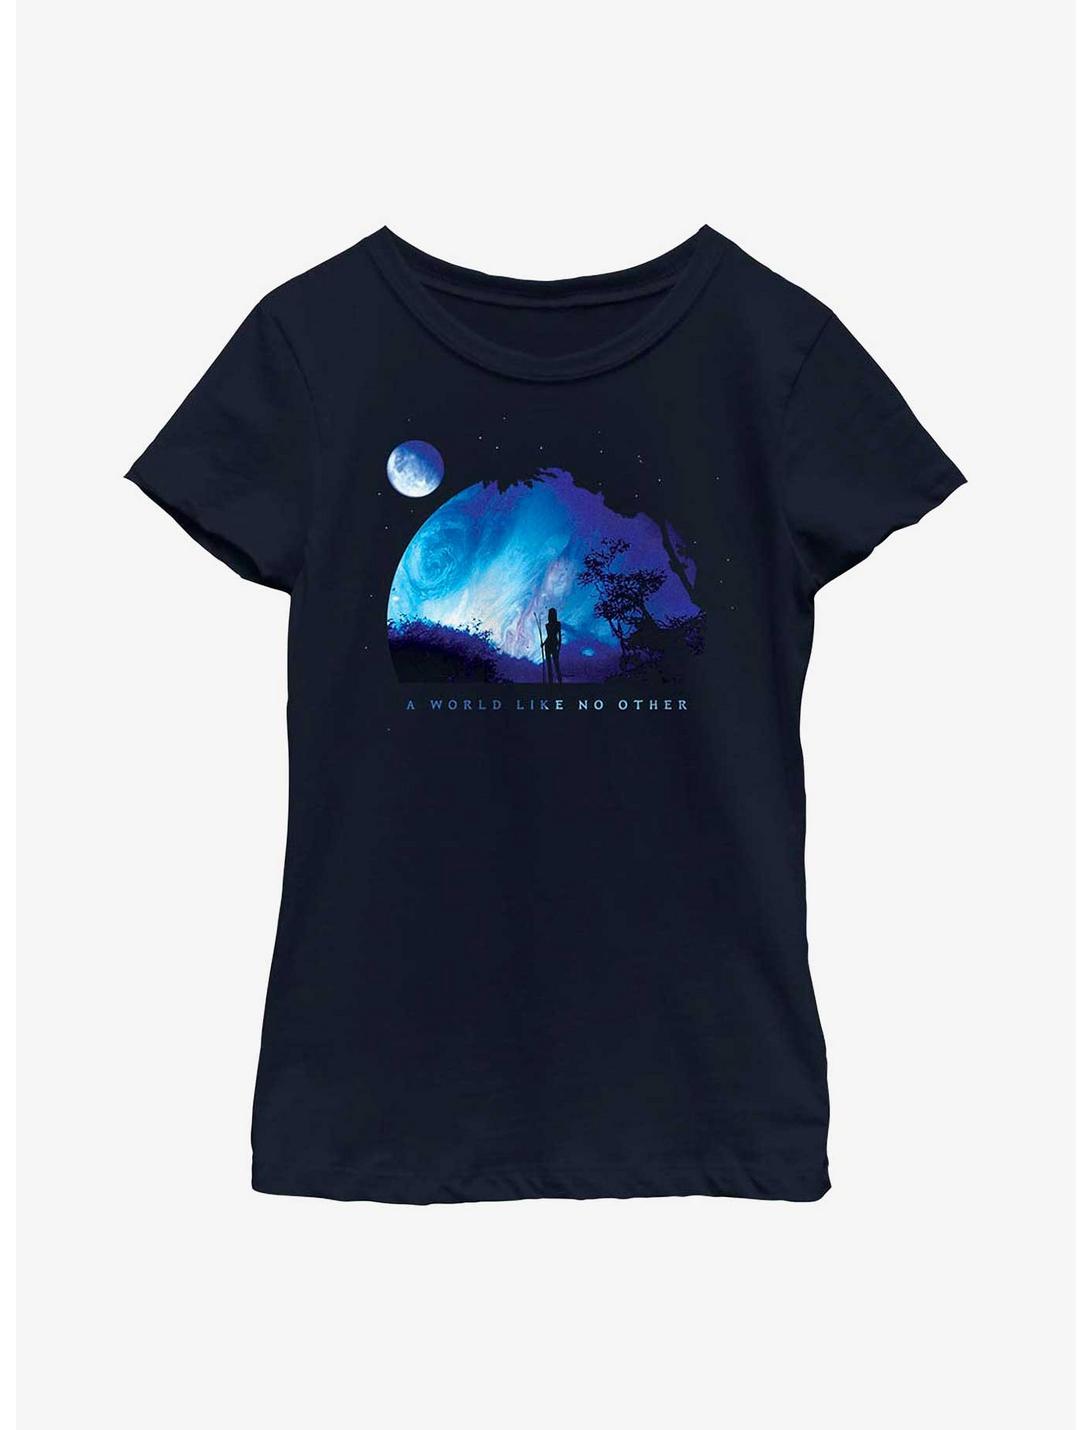 Avatar A World Like No Other Youth Girls T-Shirt, NAVY, hi-res